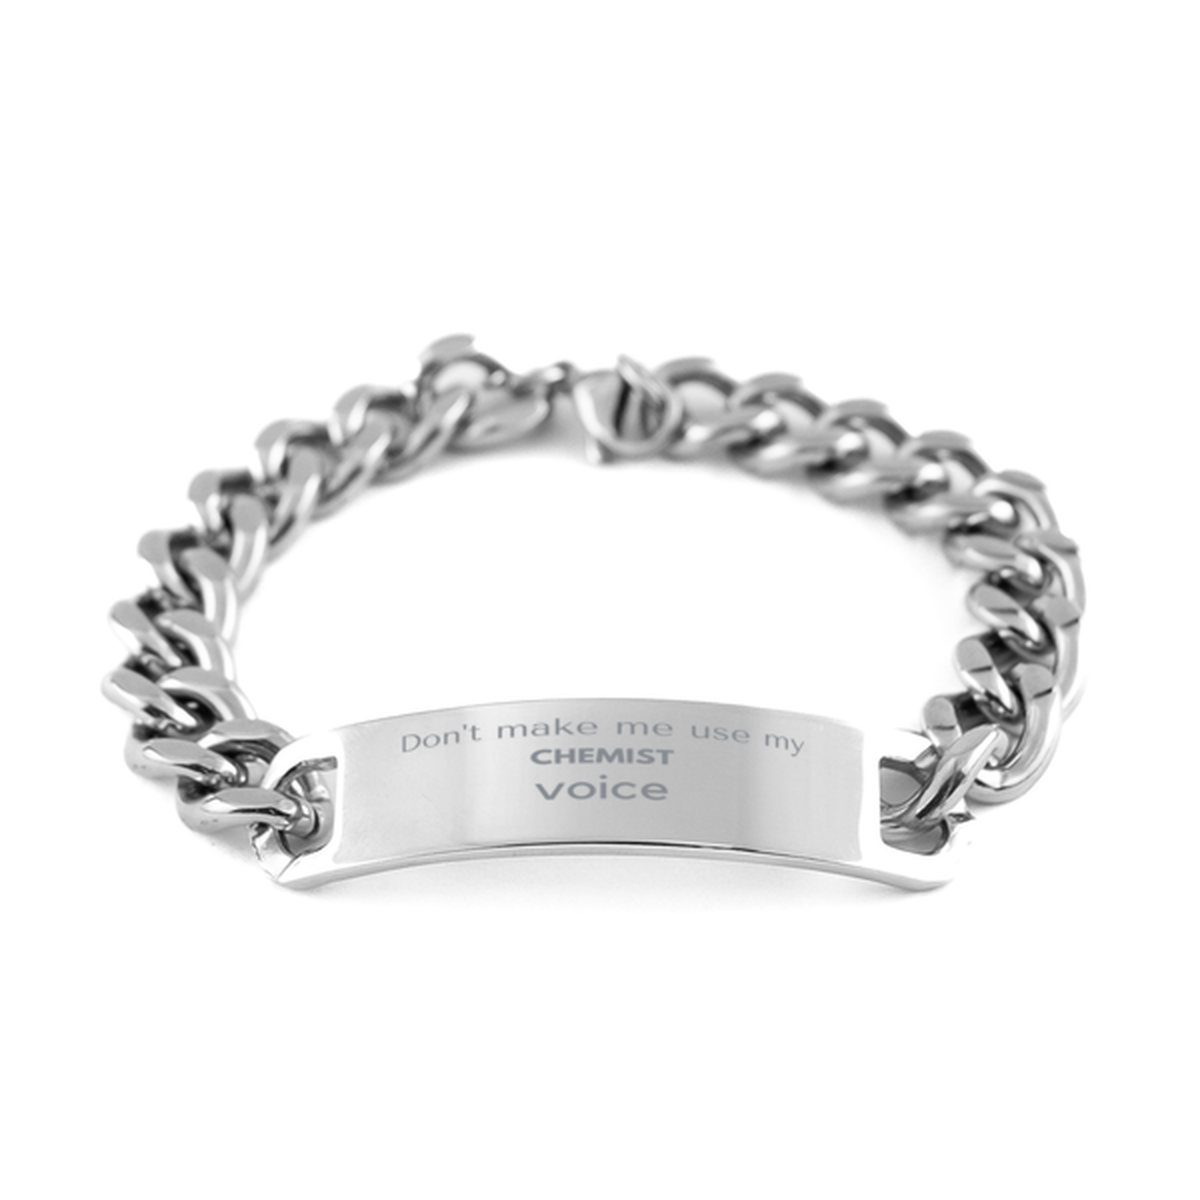 Don't make me use my Chemist voice, Sarcasm Chemist Gifts, Christmas Chemist Cuban Chain Stainless Steel Bracelet Birthday Unique Gifts For Chemist Coworkers, Men, Women, Colleague, Friends